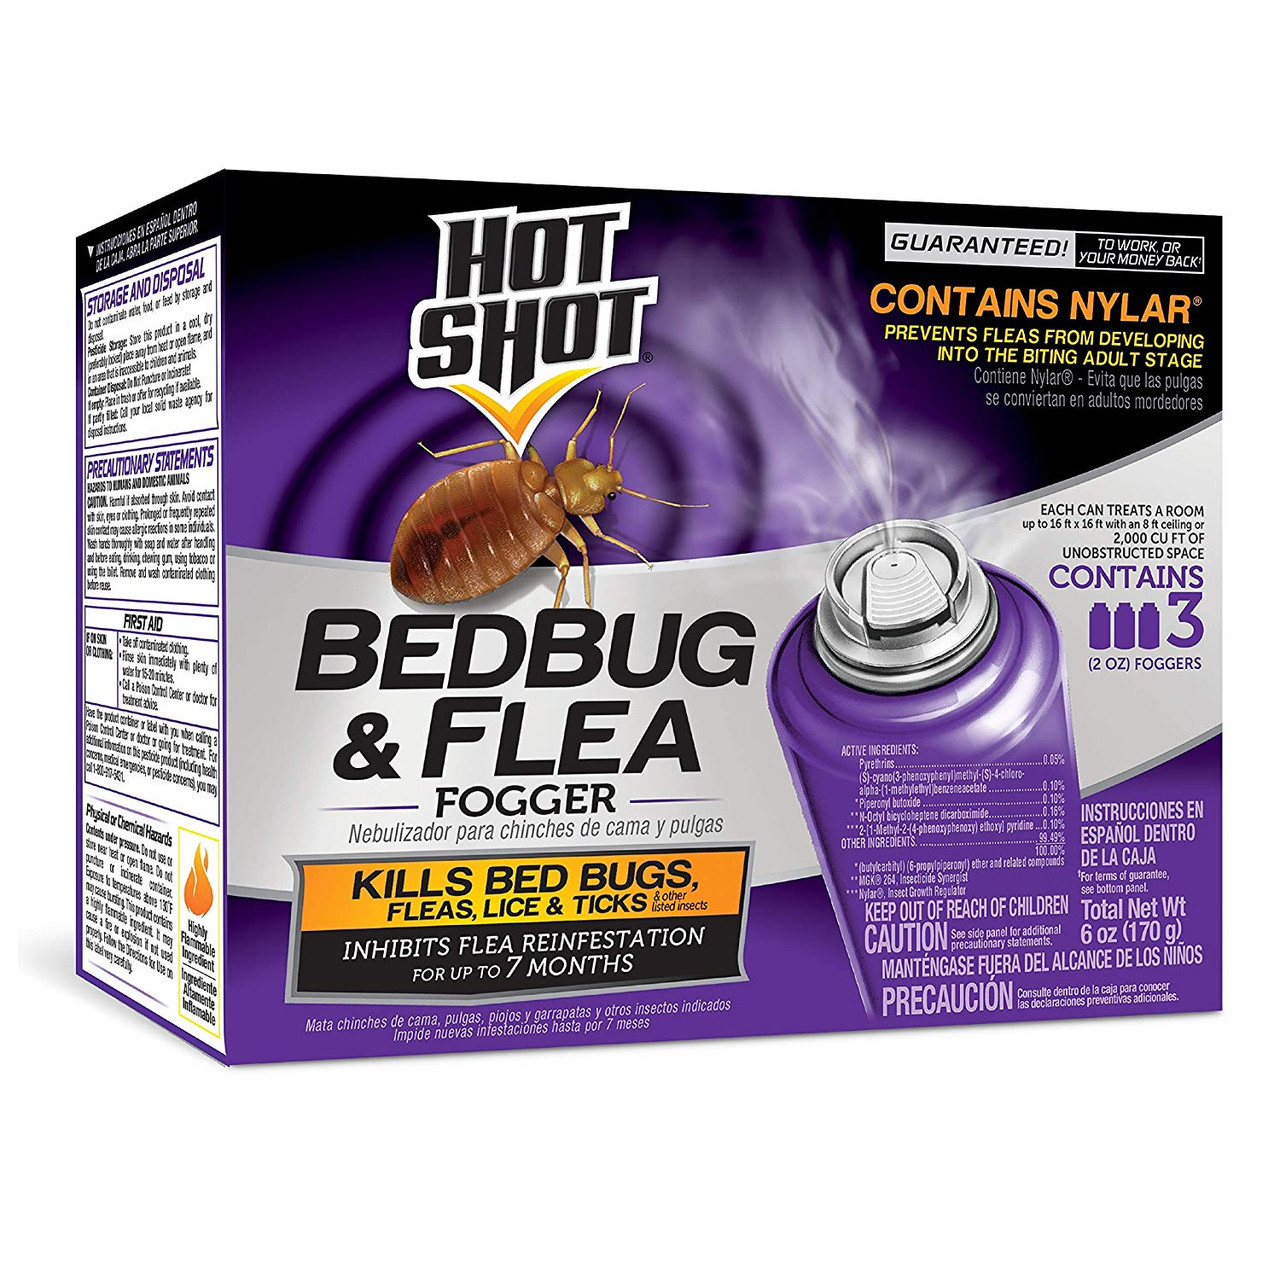 Superheated Steam: The Secret Weapon in the Battle Against Bed Bugs